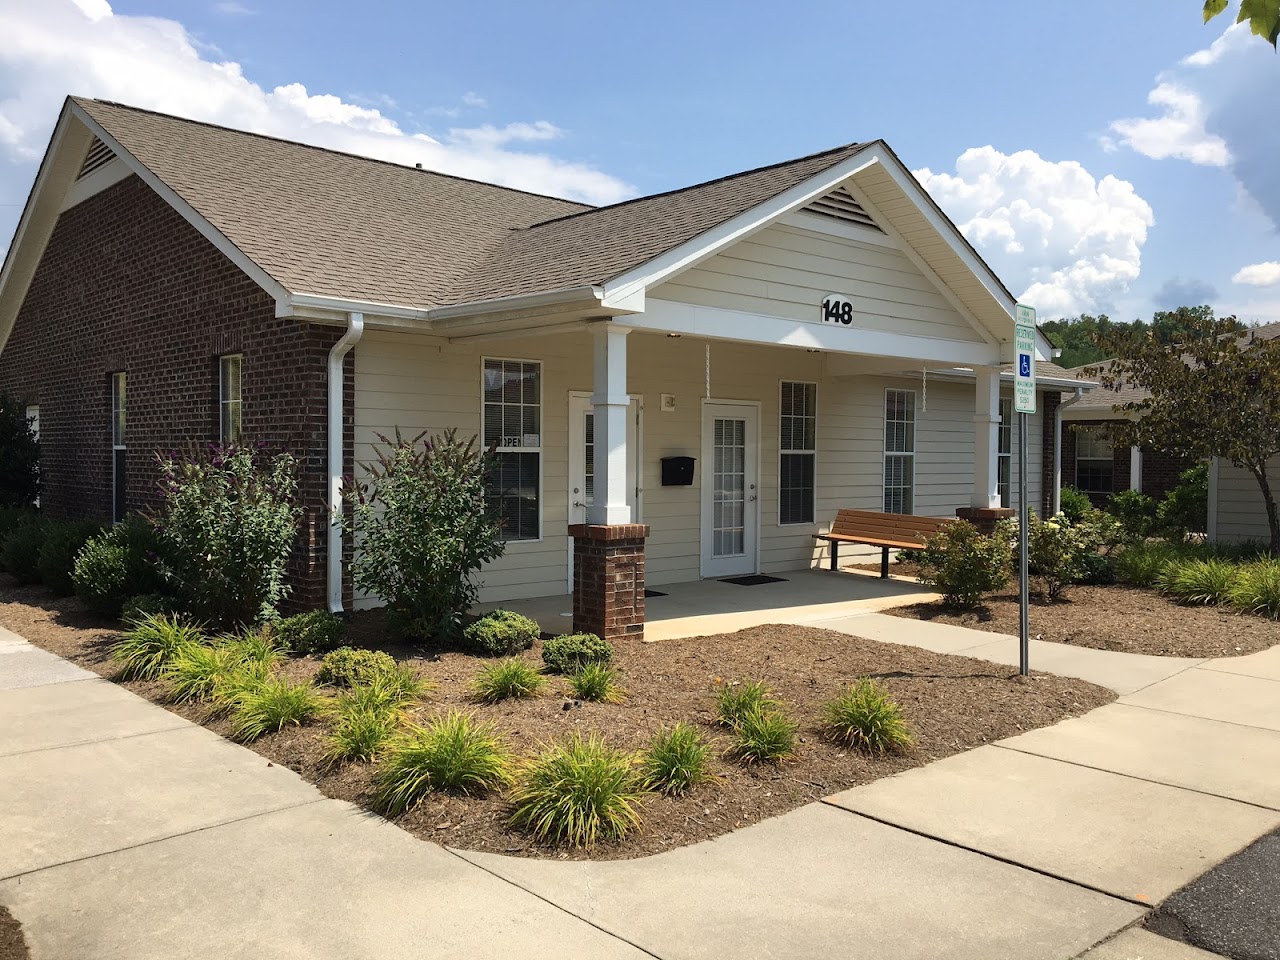 Photo of THE HAVEN AT MOUNTAIN OAKS. Affordable housing located at 148 MOUNTAIN OAK LANE SYLVA, NC 28779